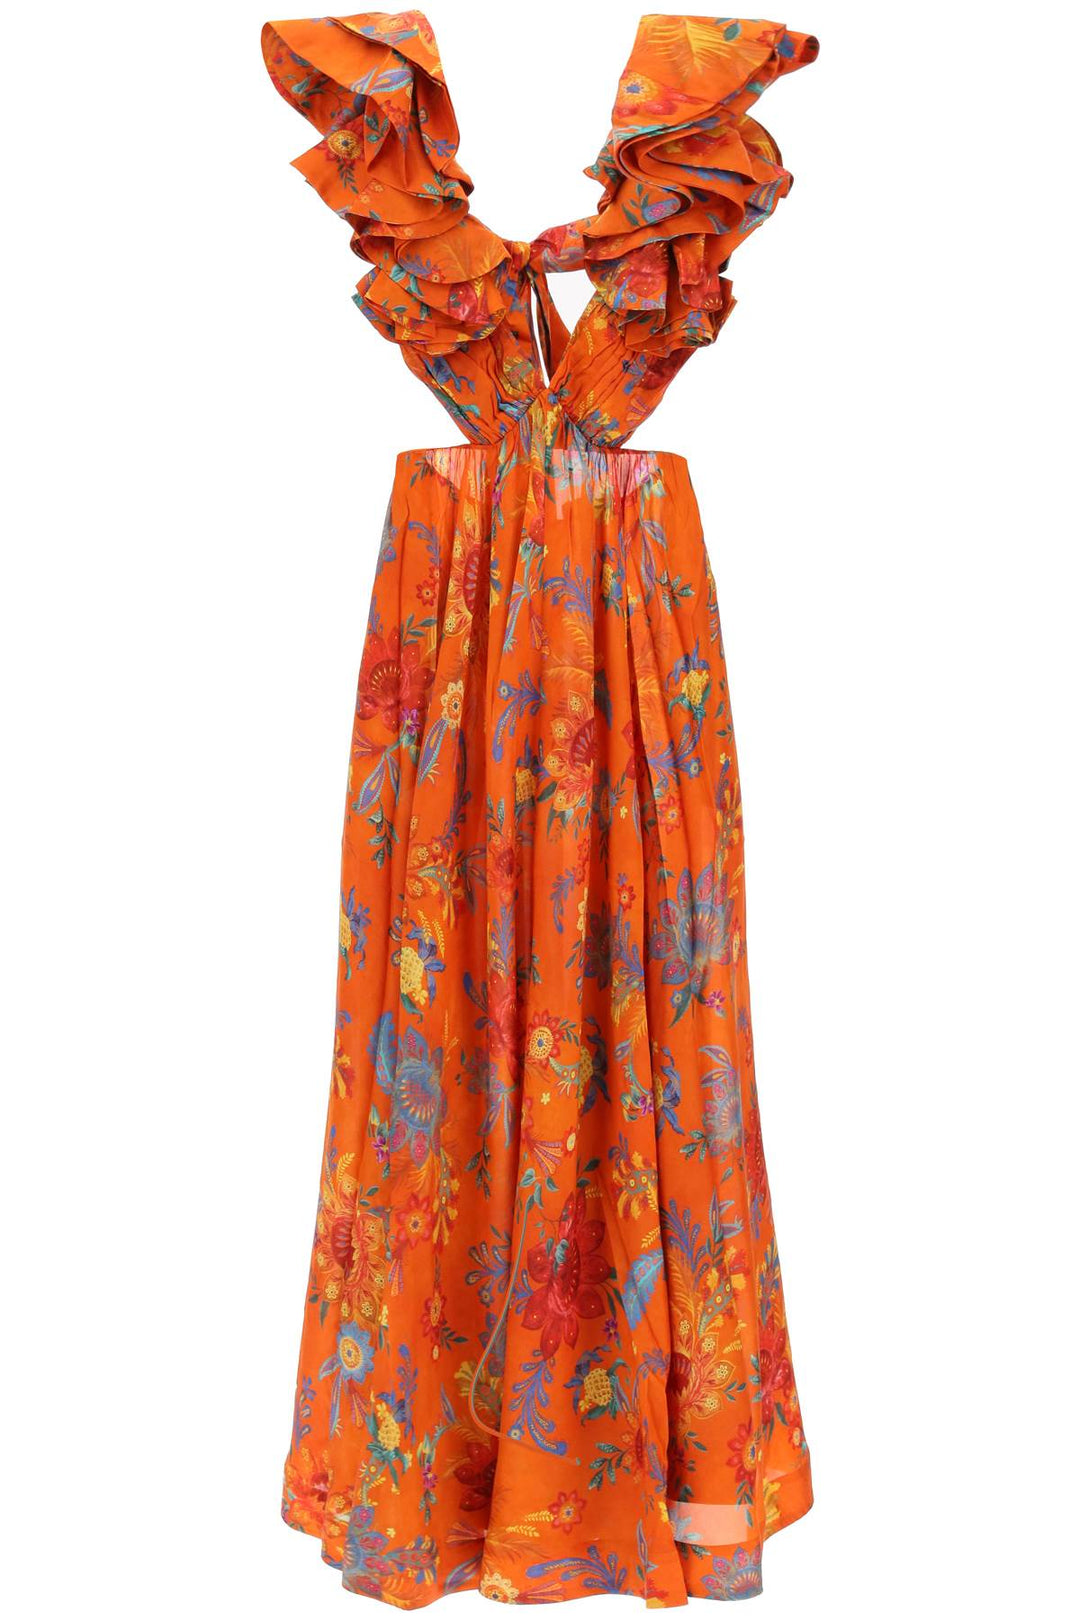 Zimmermann 'Ginger' Dress With Cut Outs   Arancio